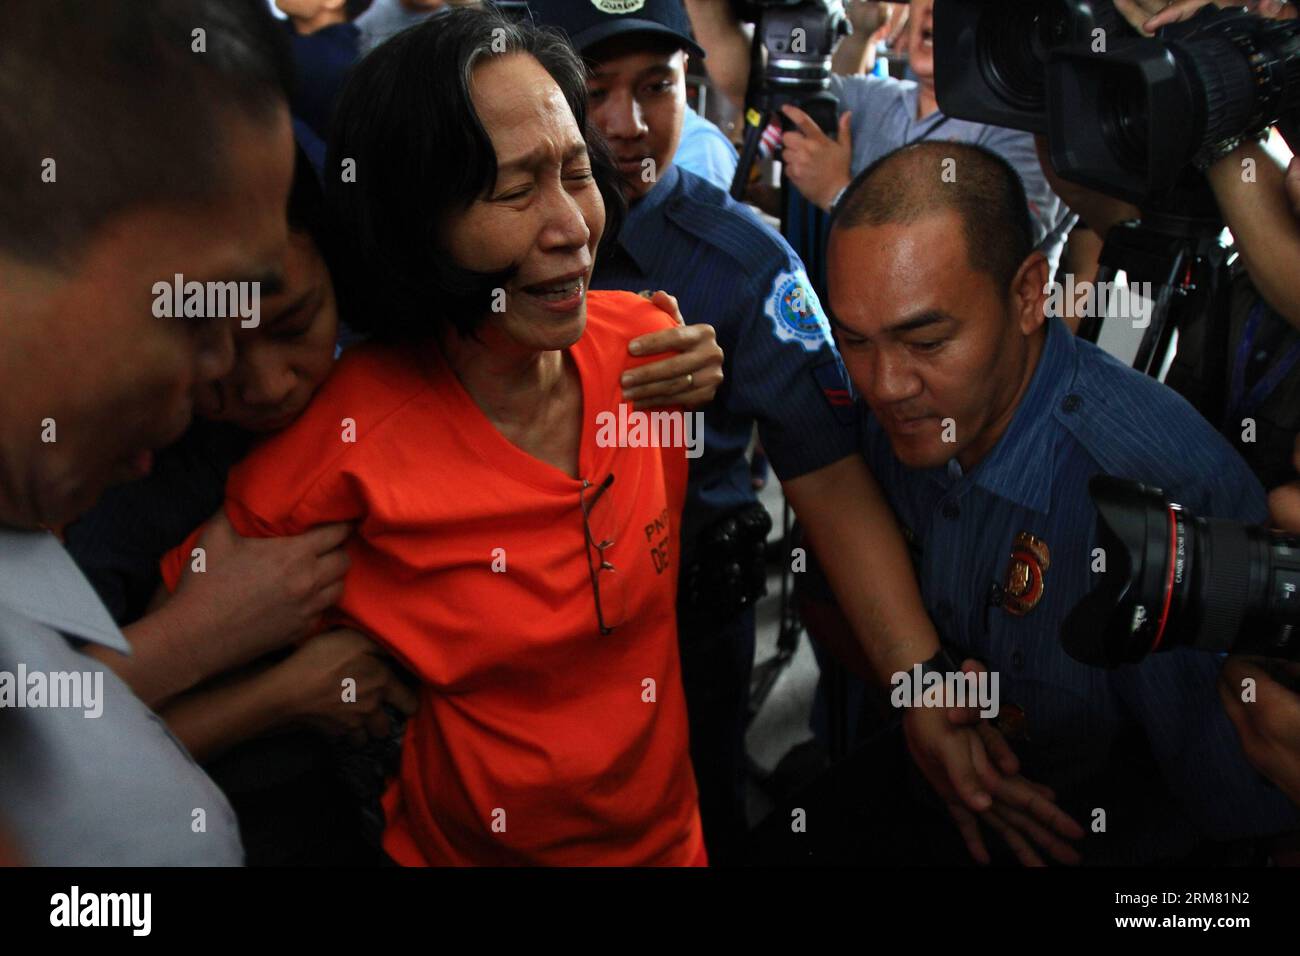 (140324) -- QUEZON CITY, March 24, 2014 (Xinhua) -- Wilma Tiamzon (C), secretary general of the Communist Party of the Philippines (CPP)-NPA, reacts as she is taken by policemen into a police van after inquest proceeding at Camp Crame in Quezon City, the Philippines, March 24, 2014. The Communist Party of the Philippines, New People s Army and National Democratic Front (CPP-NPA-NDF) vowed Monday to pursue armed struggle despite the arrest of their two top leaders. (Xinhua/Rouelle Umali) PHILIPPINES-QUEZON CITY-LEFTIST REBEL LEADER PUBLICATIONxNOTxINxCHN   Quezon City March 24 2014 XINHUA Wilma Stock Photo